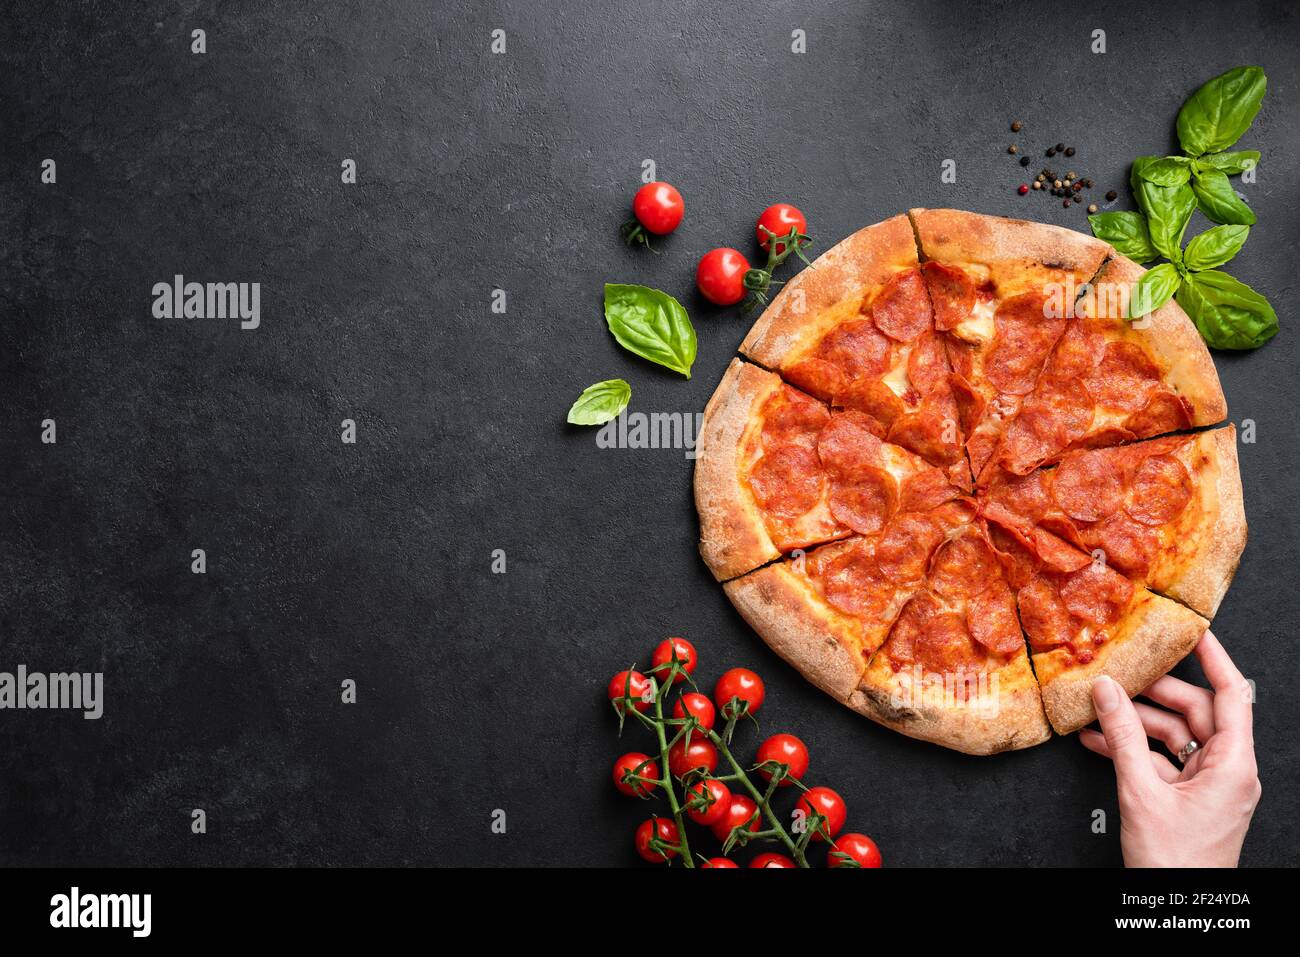 Hand taking slice of pepperoni pizza. Black stone concrete background, top view with copy space for text or design elements. Eating unhealthy fast foo Stock Photo